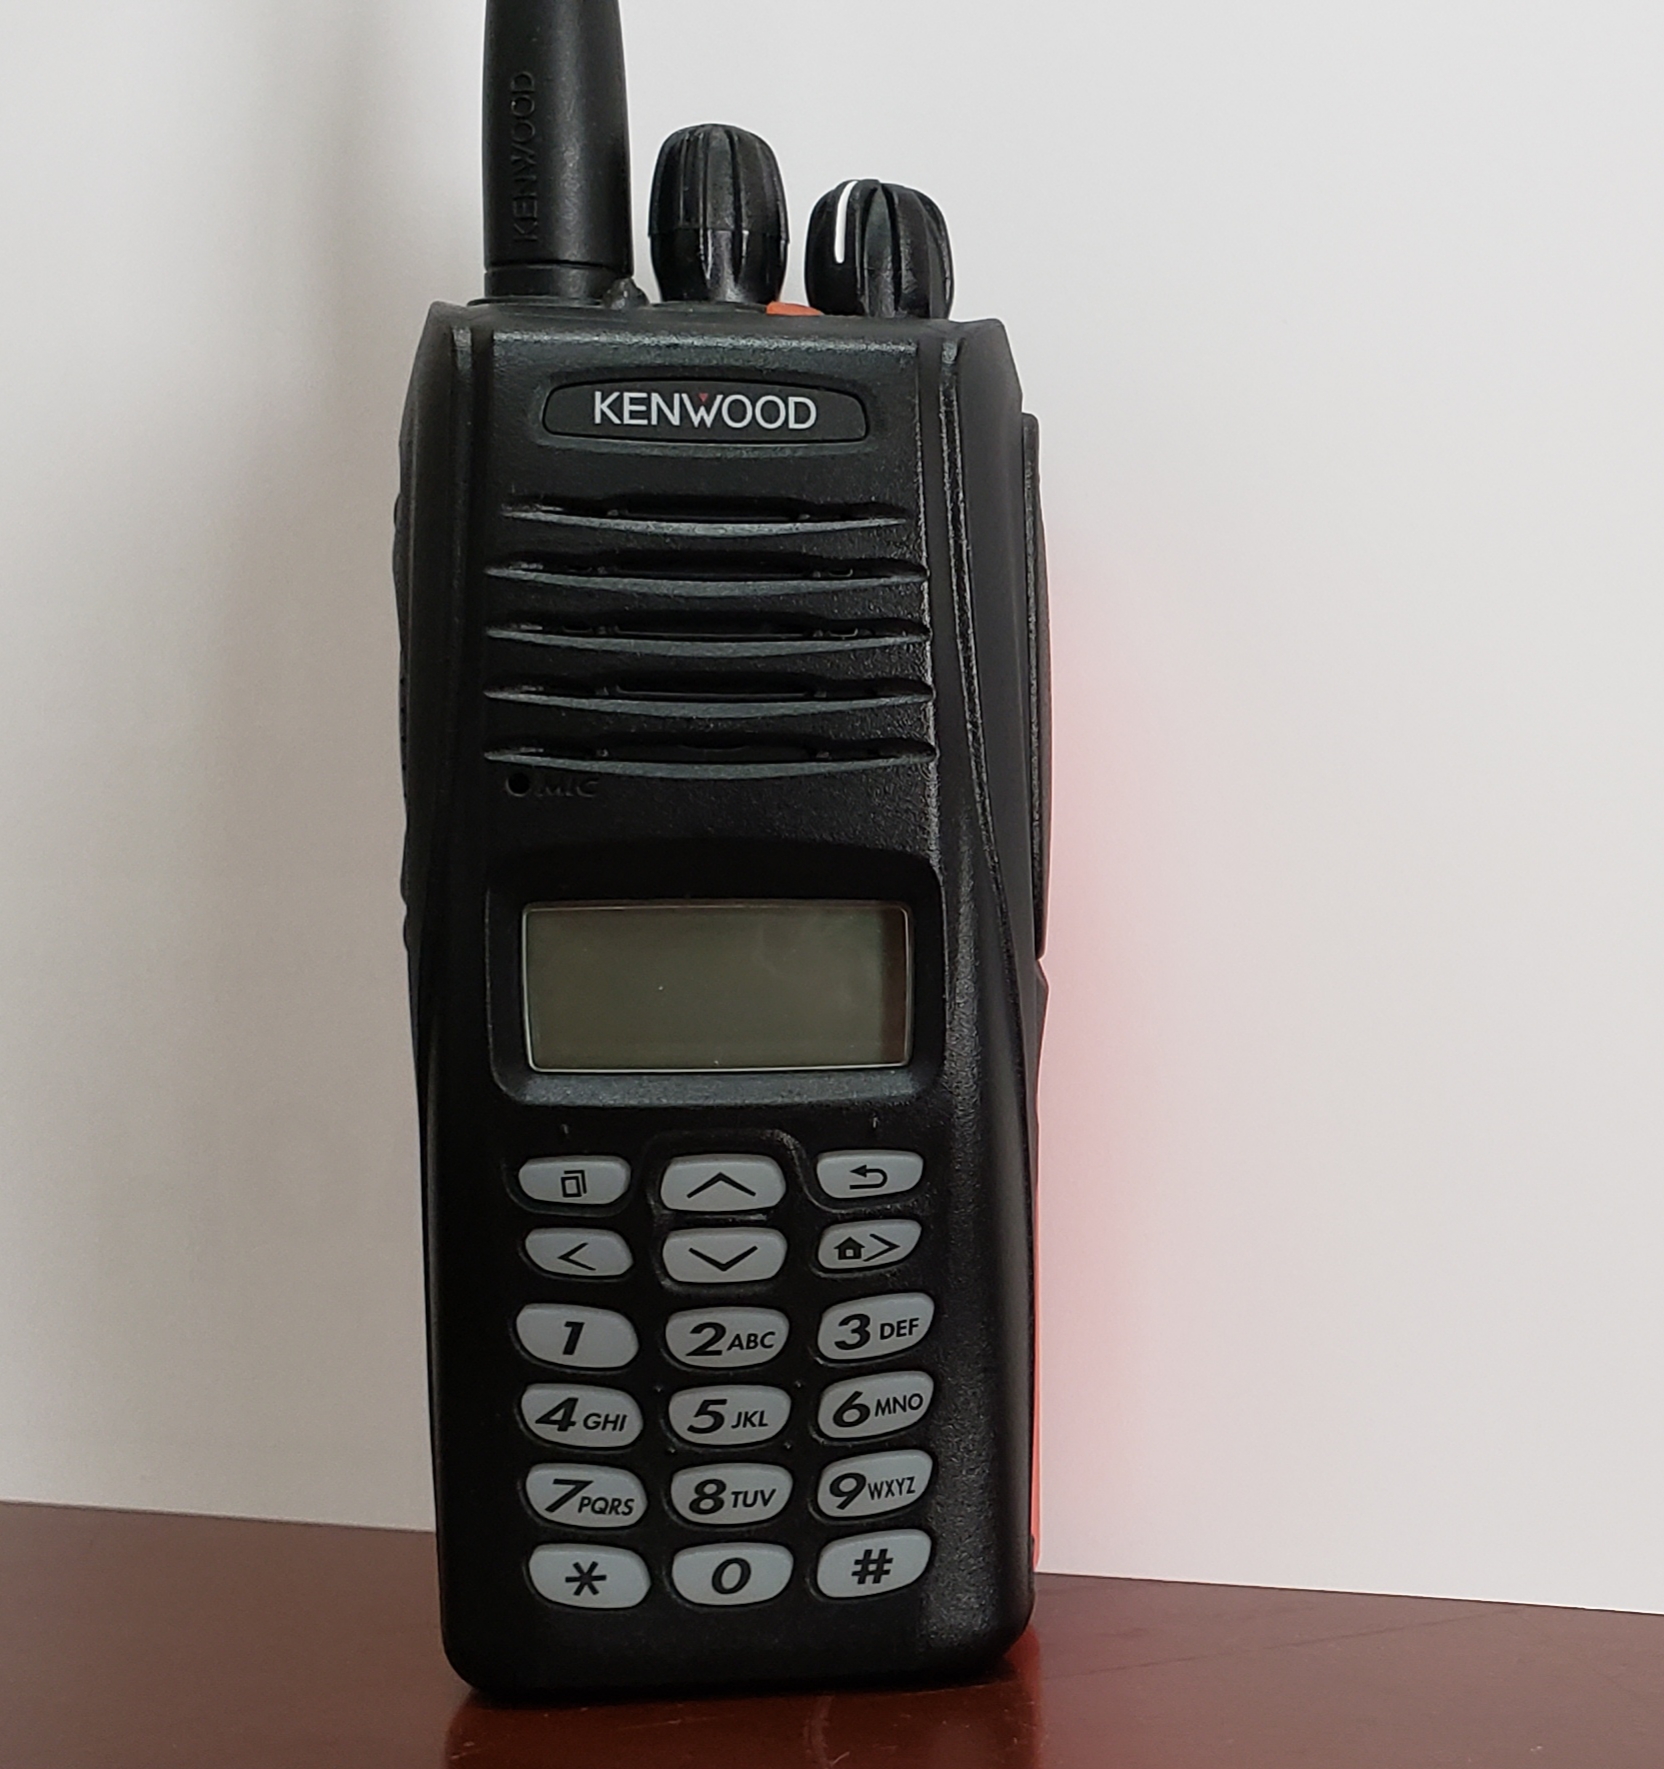 A Kenwood radio that ties into the campus radio network.